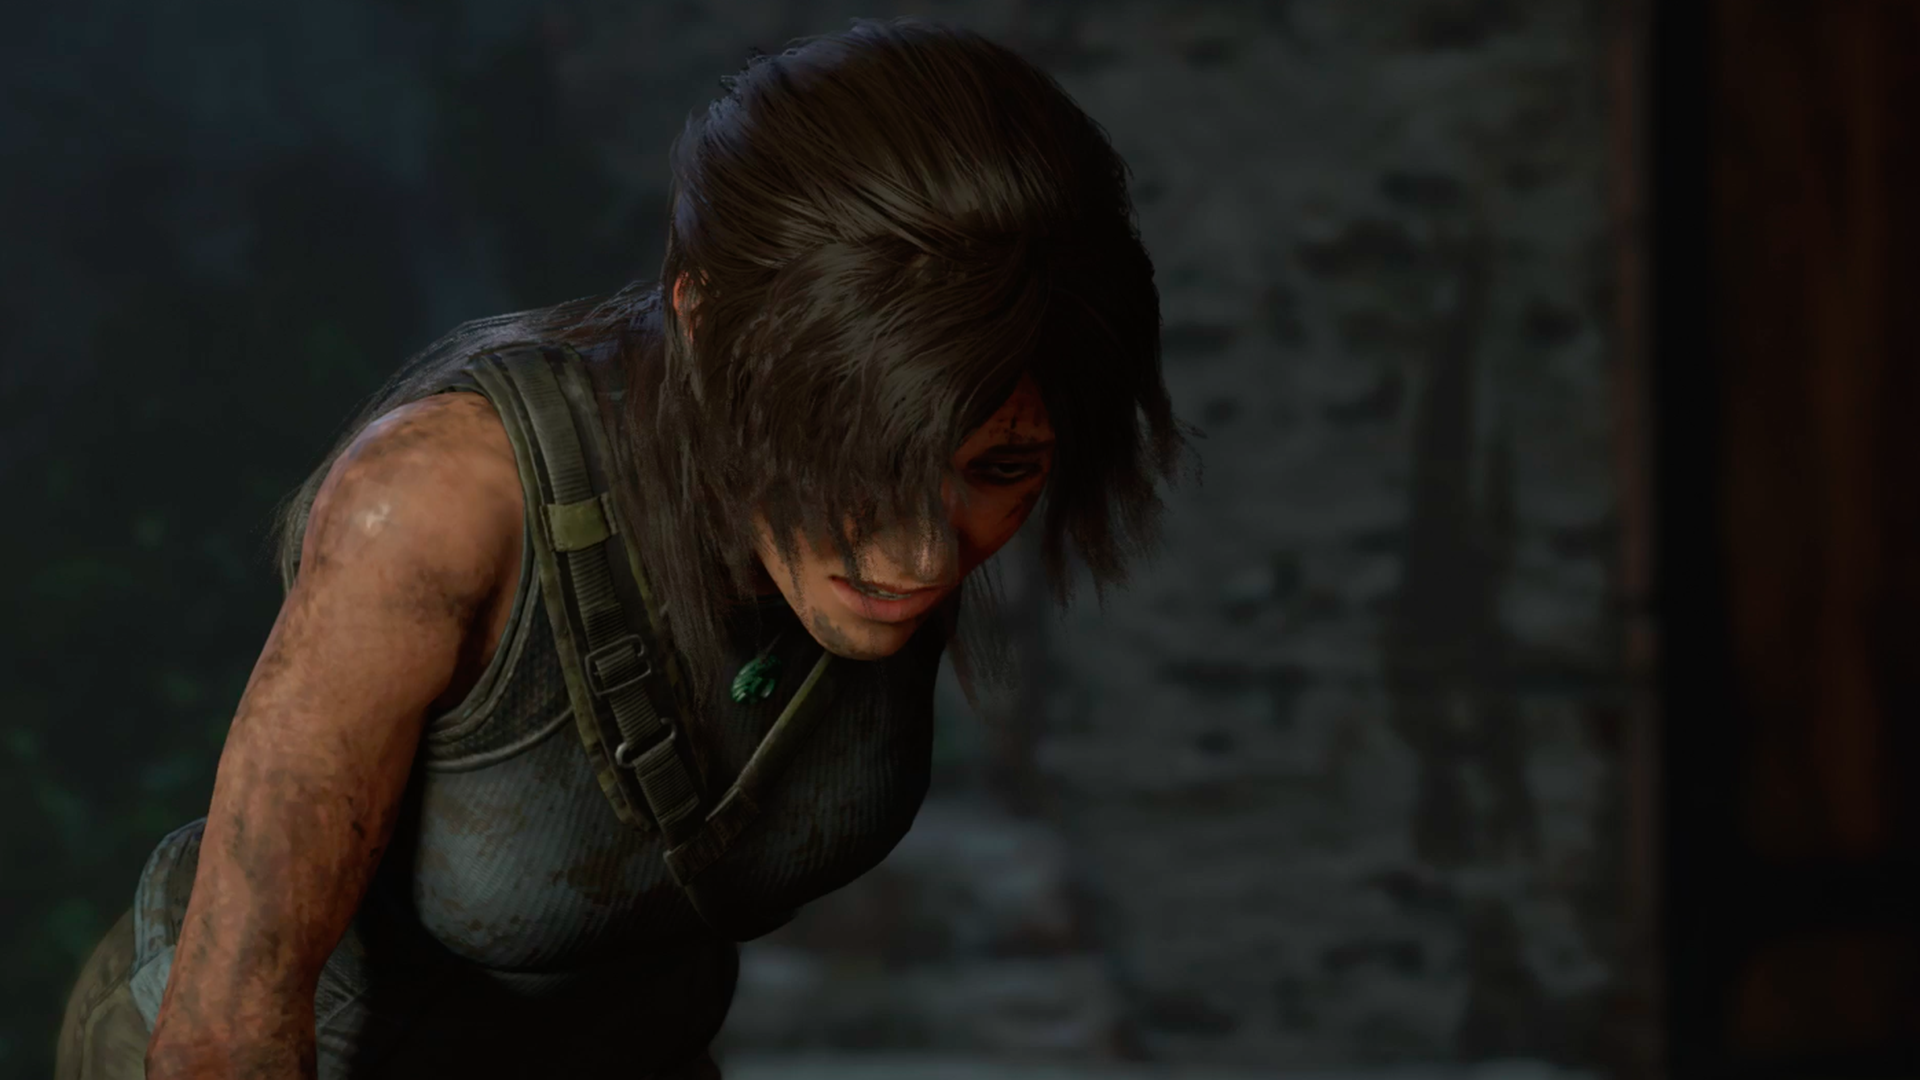 Video game screenshot of a woman in a tank top leaning over, scuffed with mud, grimacing